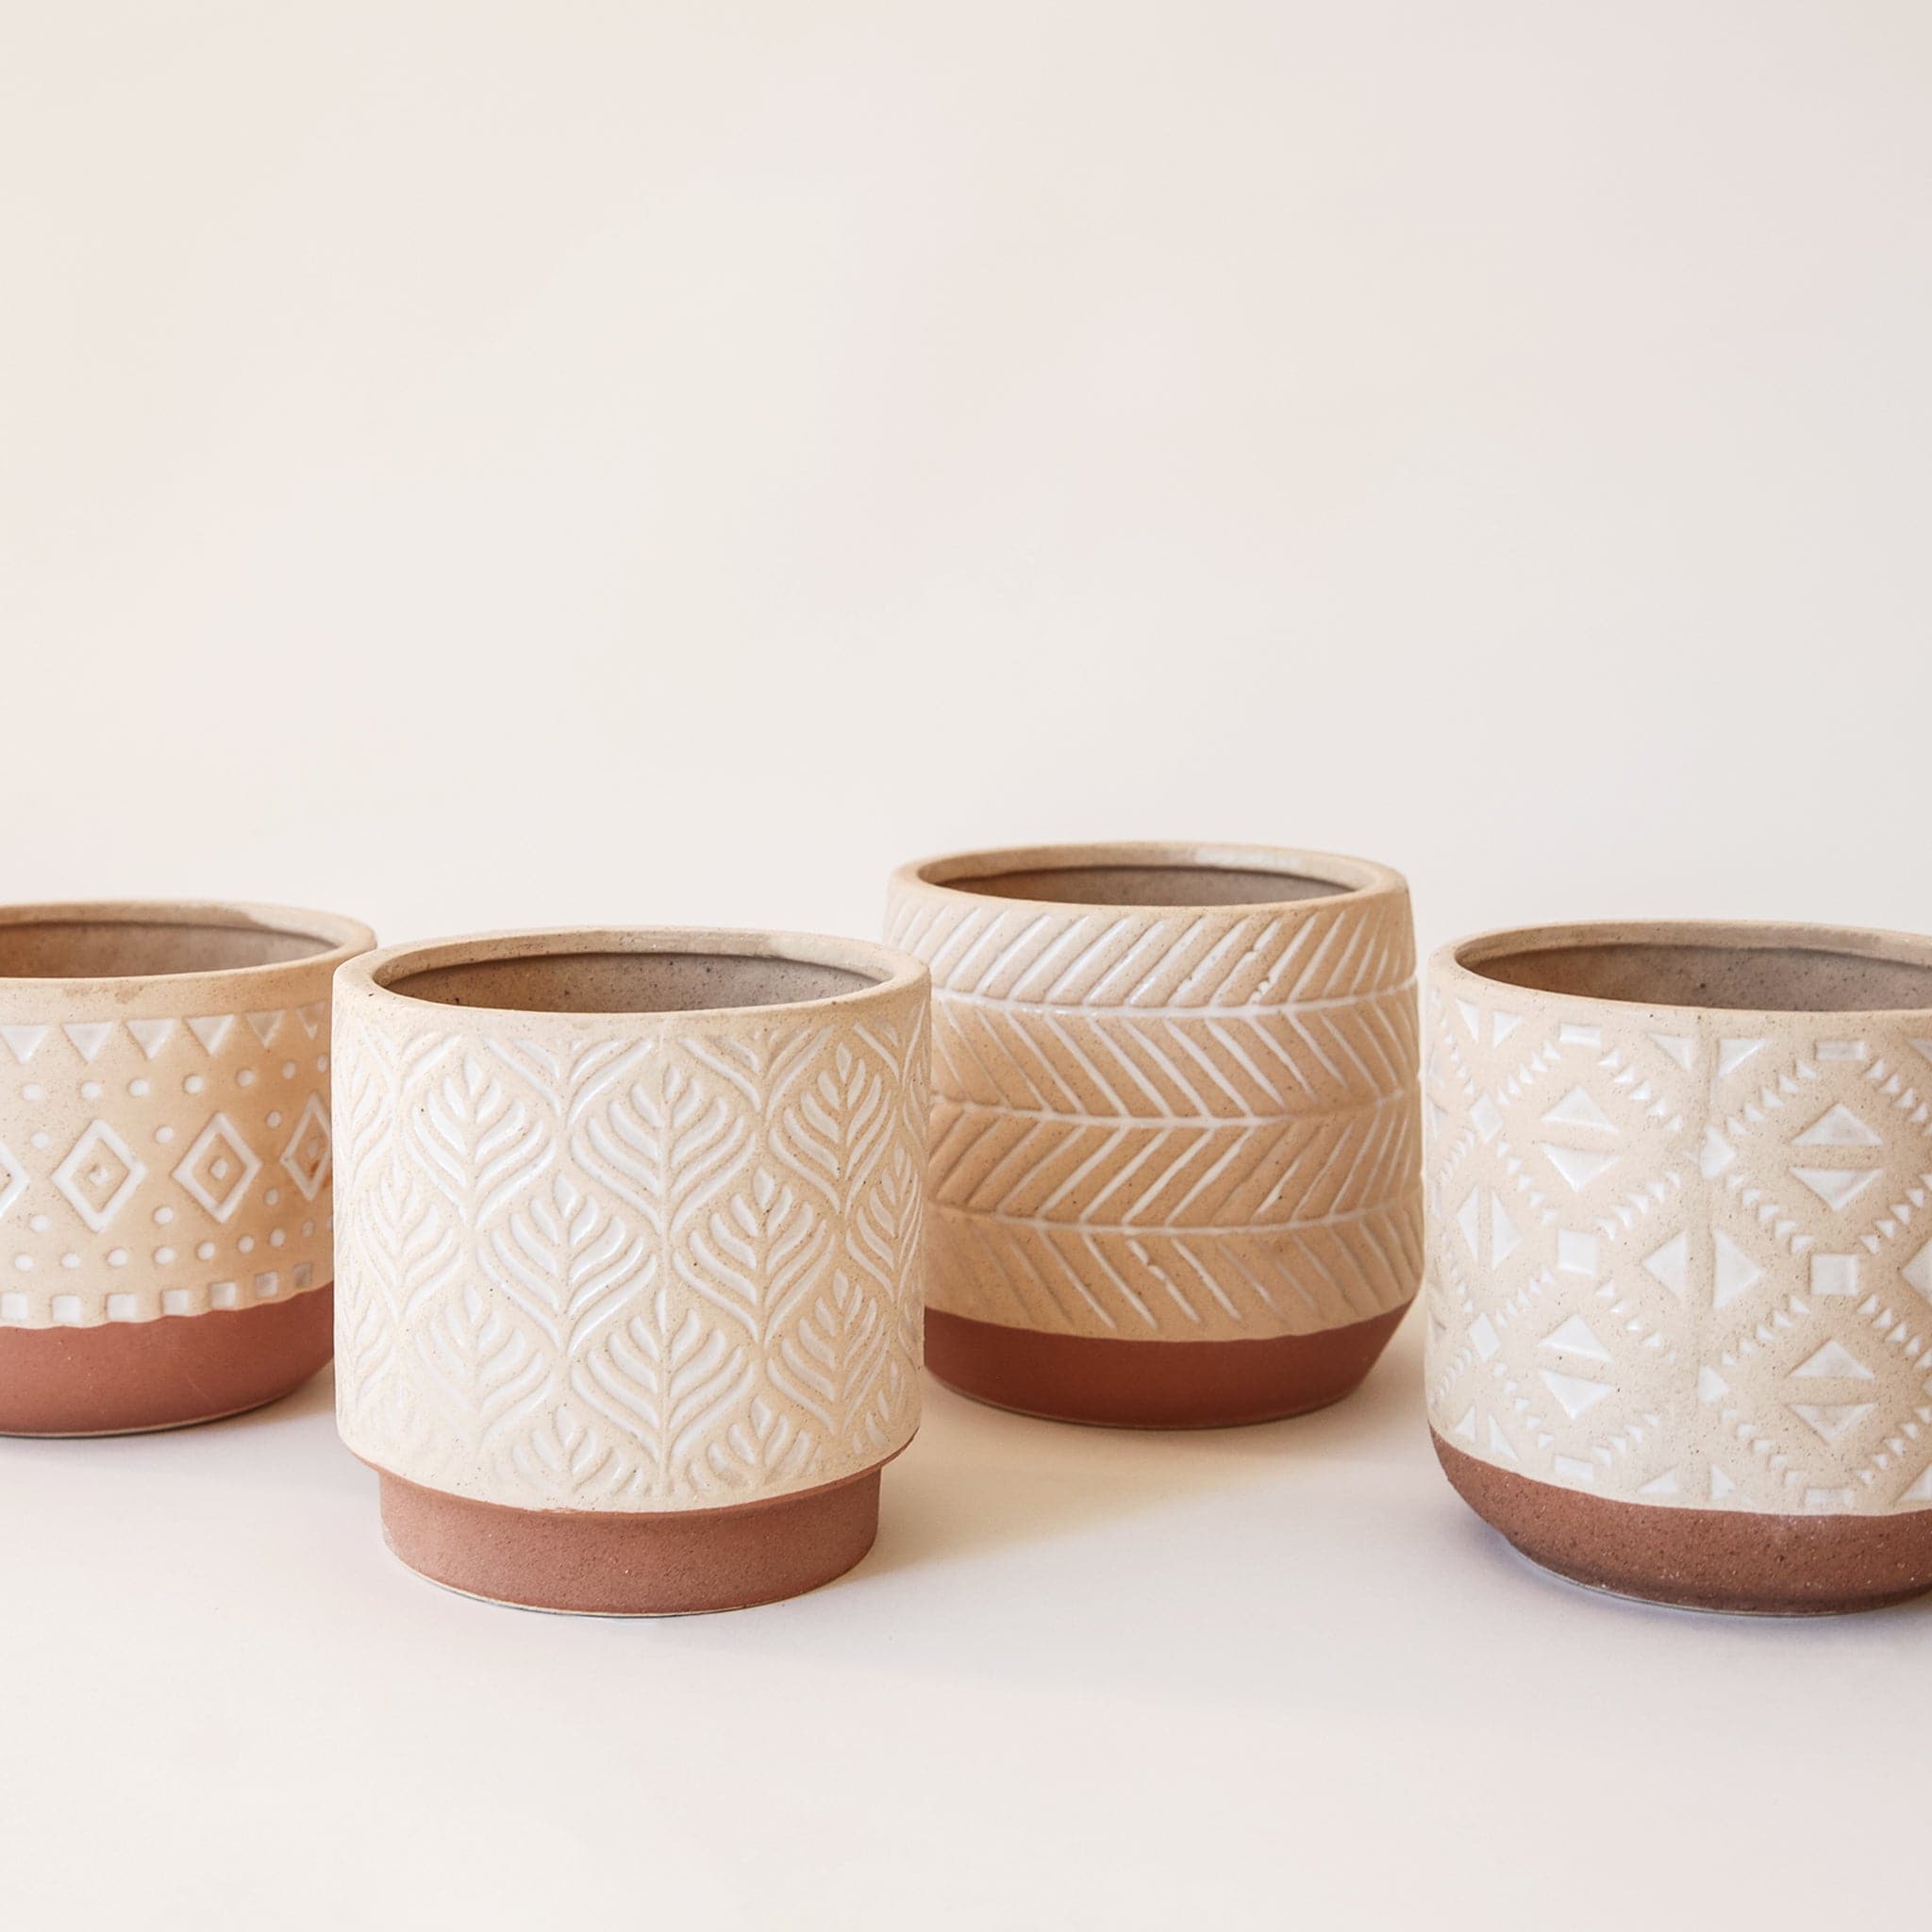 Each pot type shown. The bottom of the vessel is a dark tan while the top color is lighter with white imprinted designs.